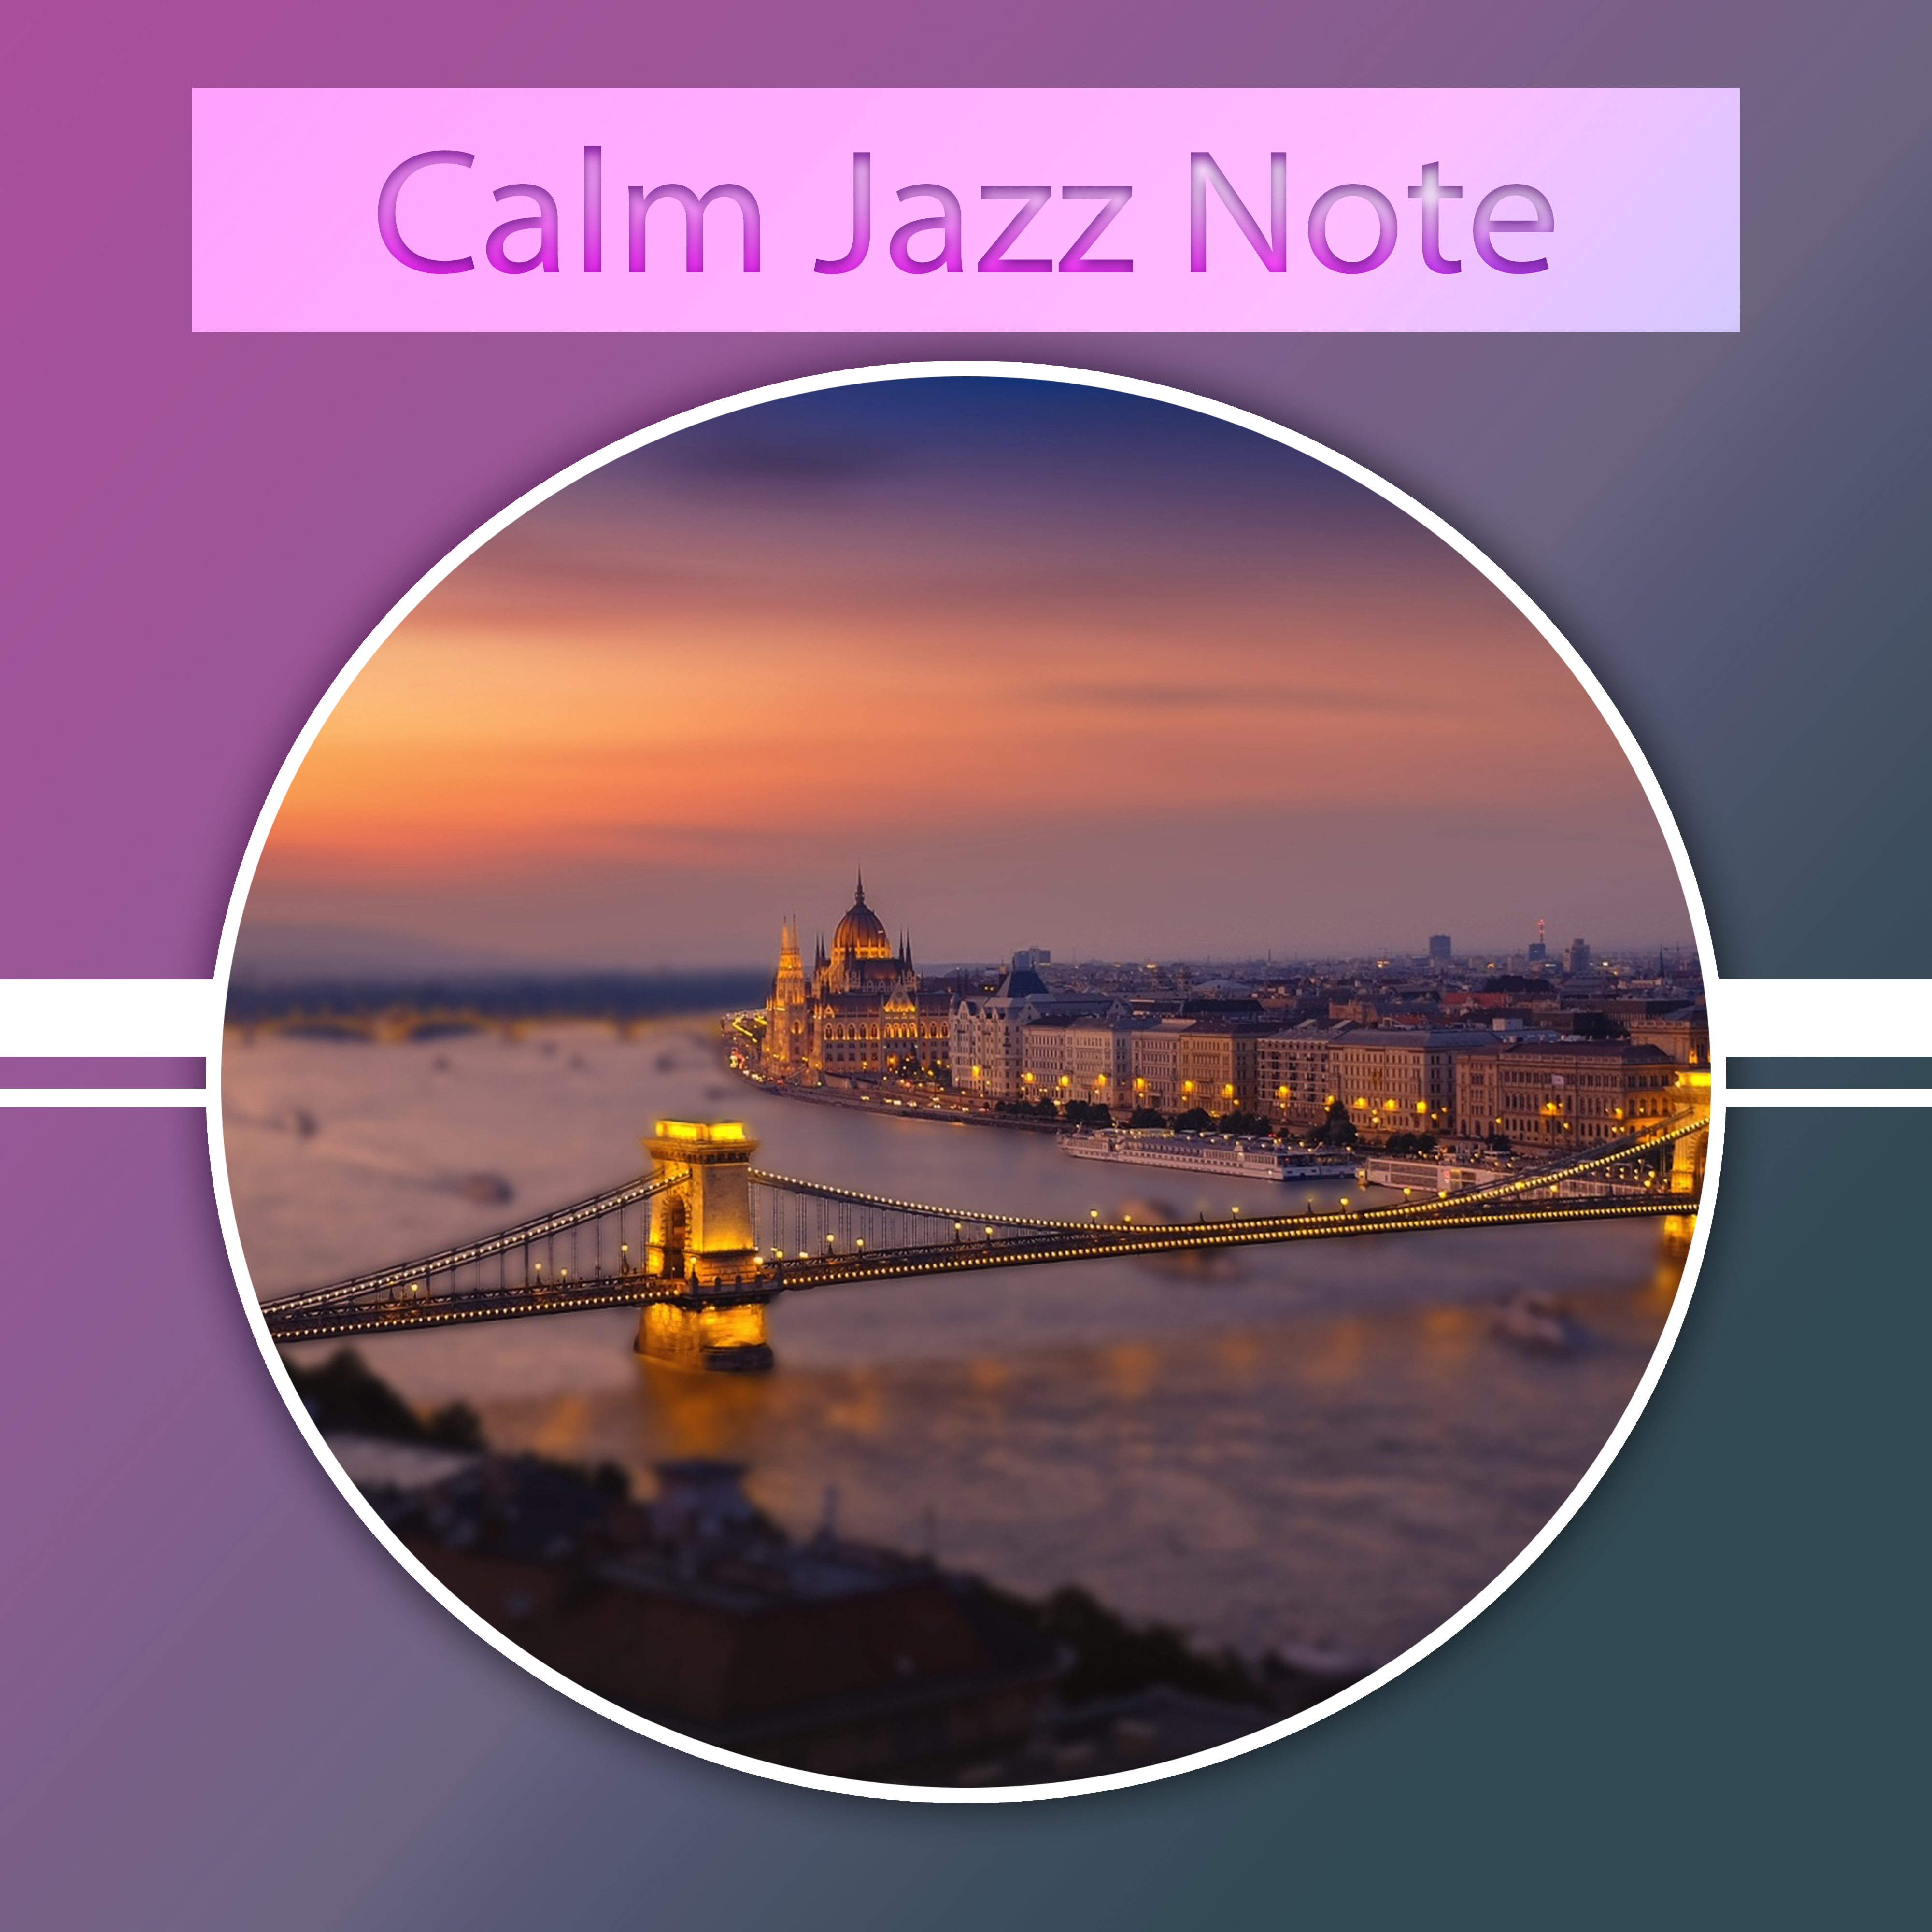 Calm Jazz Note  Stress Relief, Smooth Jazz Bar, Relaxing Piano Music, Mellow Sounds